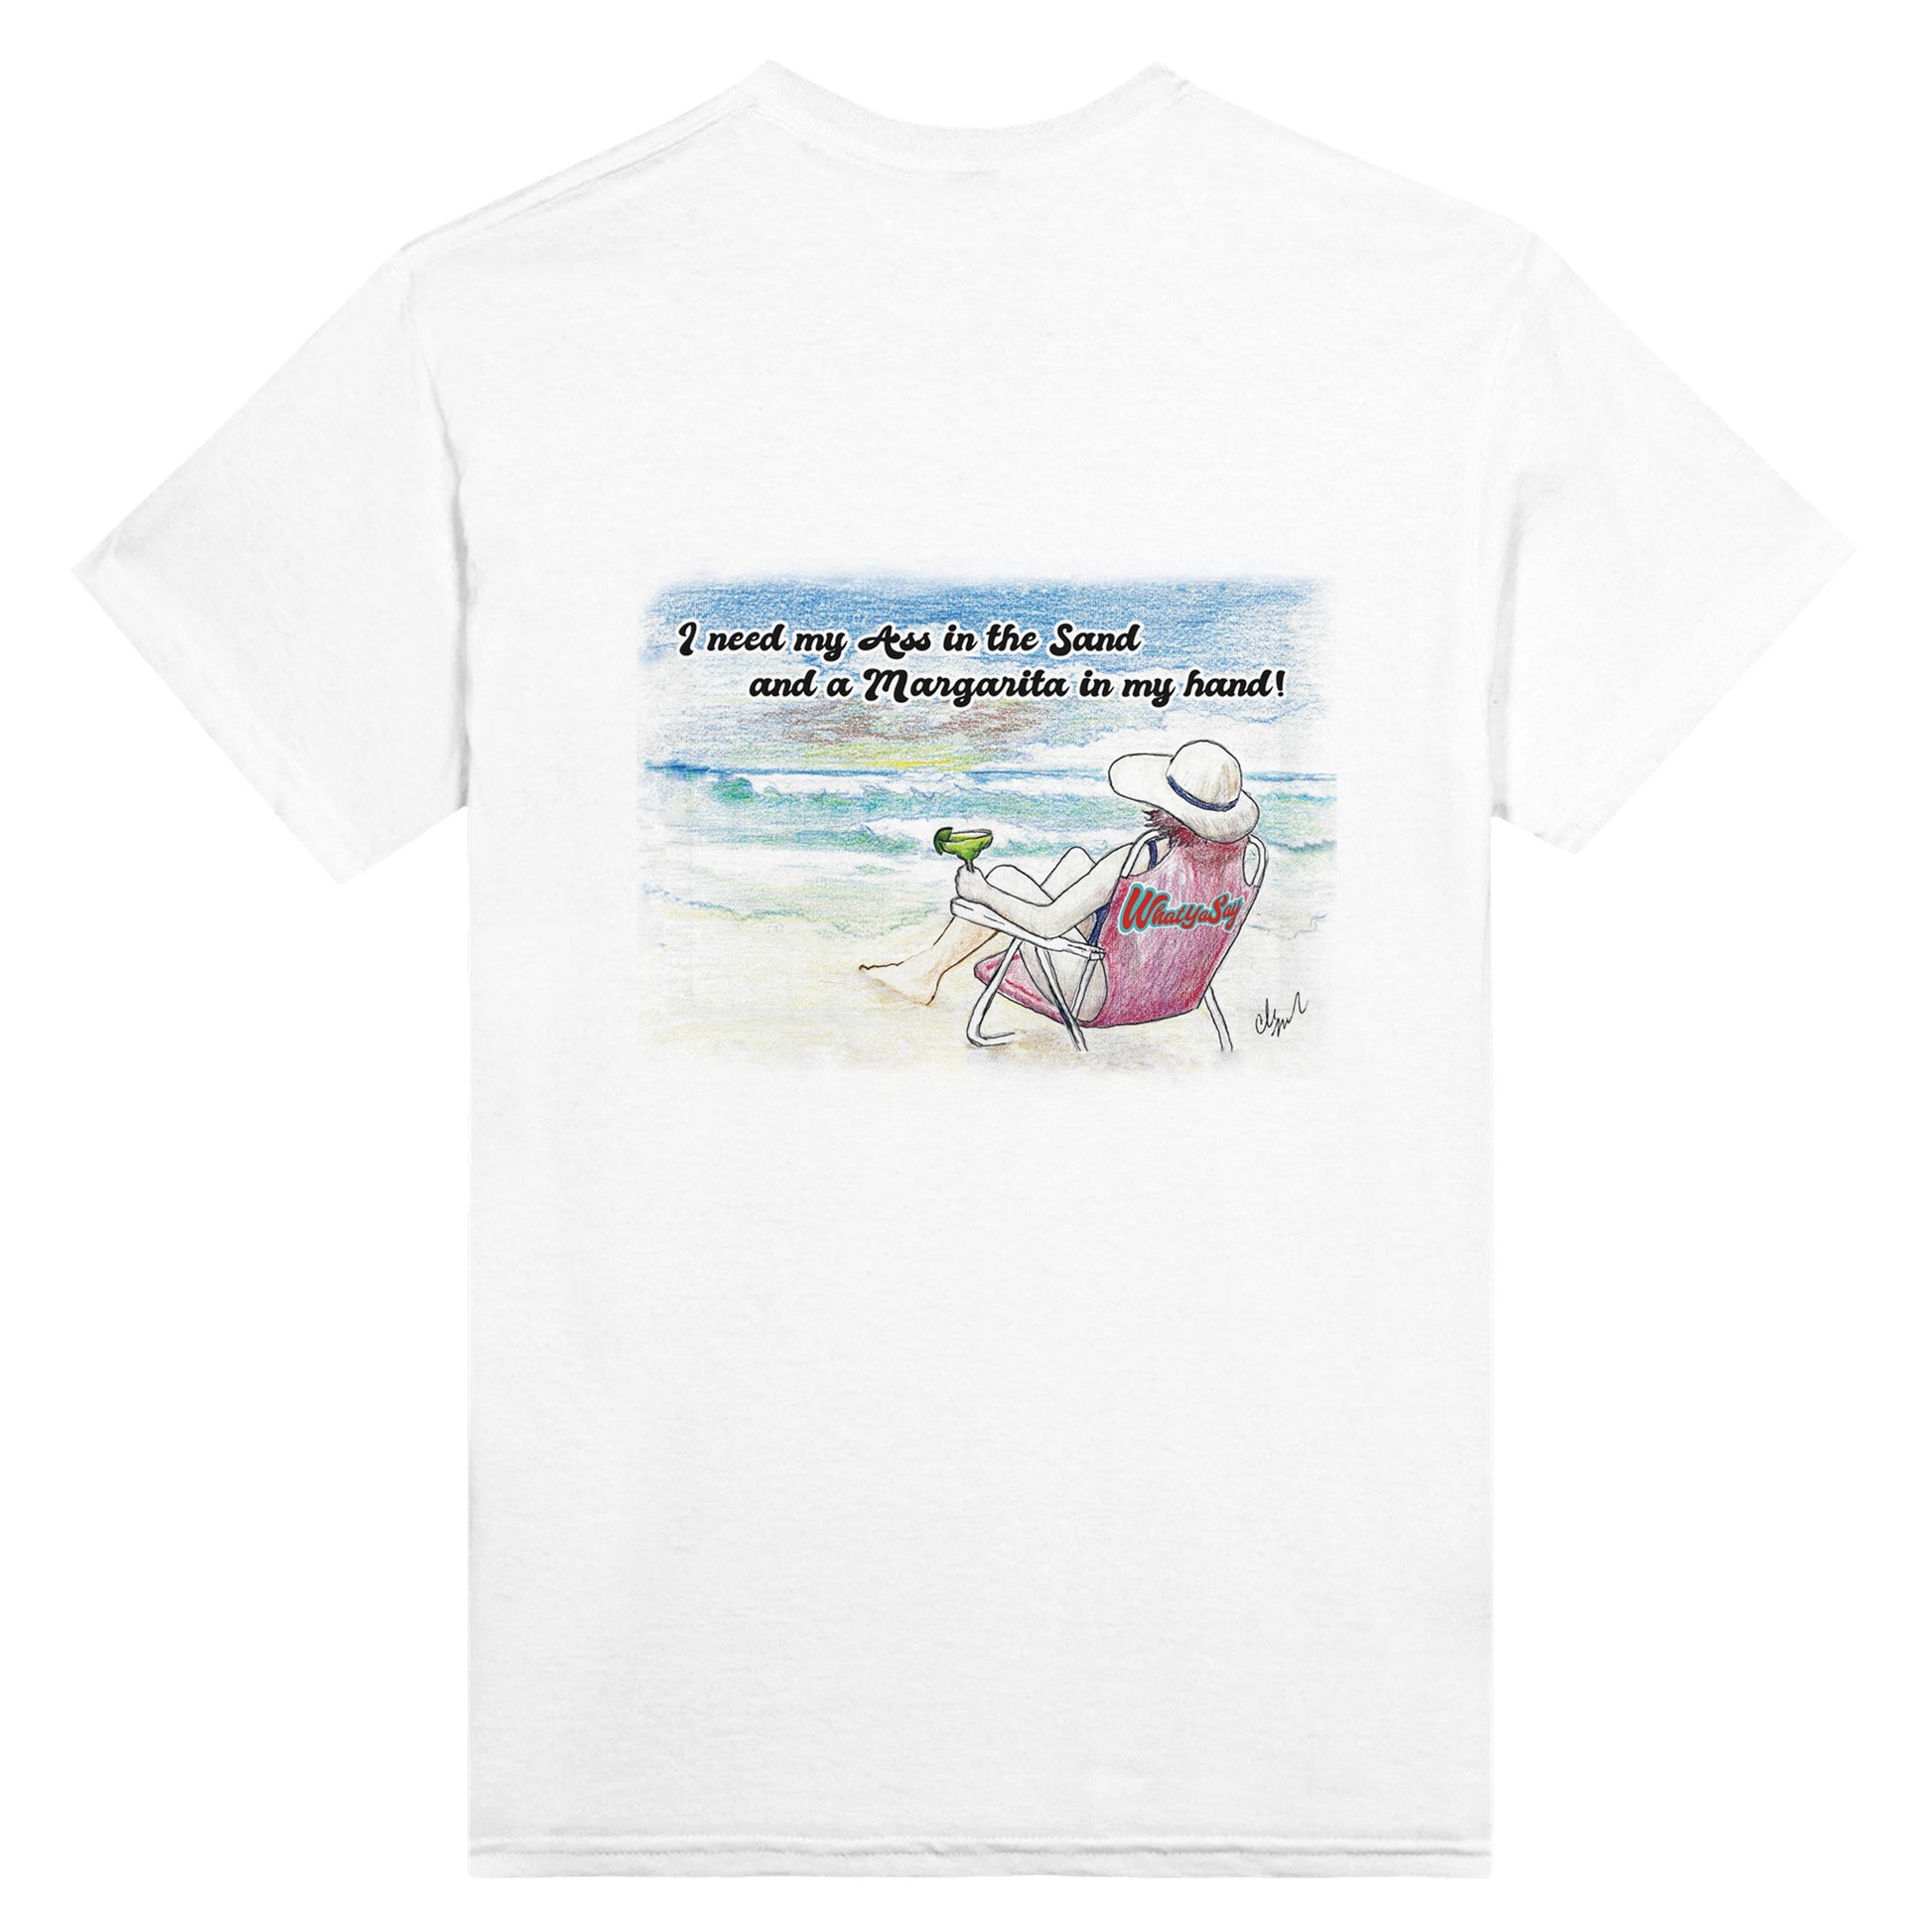 A white heavyweight Unisex Crewneck t-shirt with original artwork and motto I need my Ass in the Sand and a Margarita in my hand on back with WhatYa Say logo on front from WhatYa Say Apparel lying flat rear view.